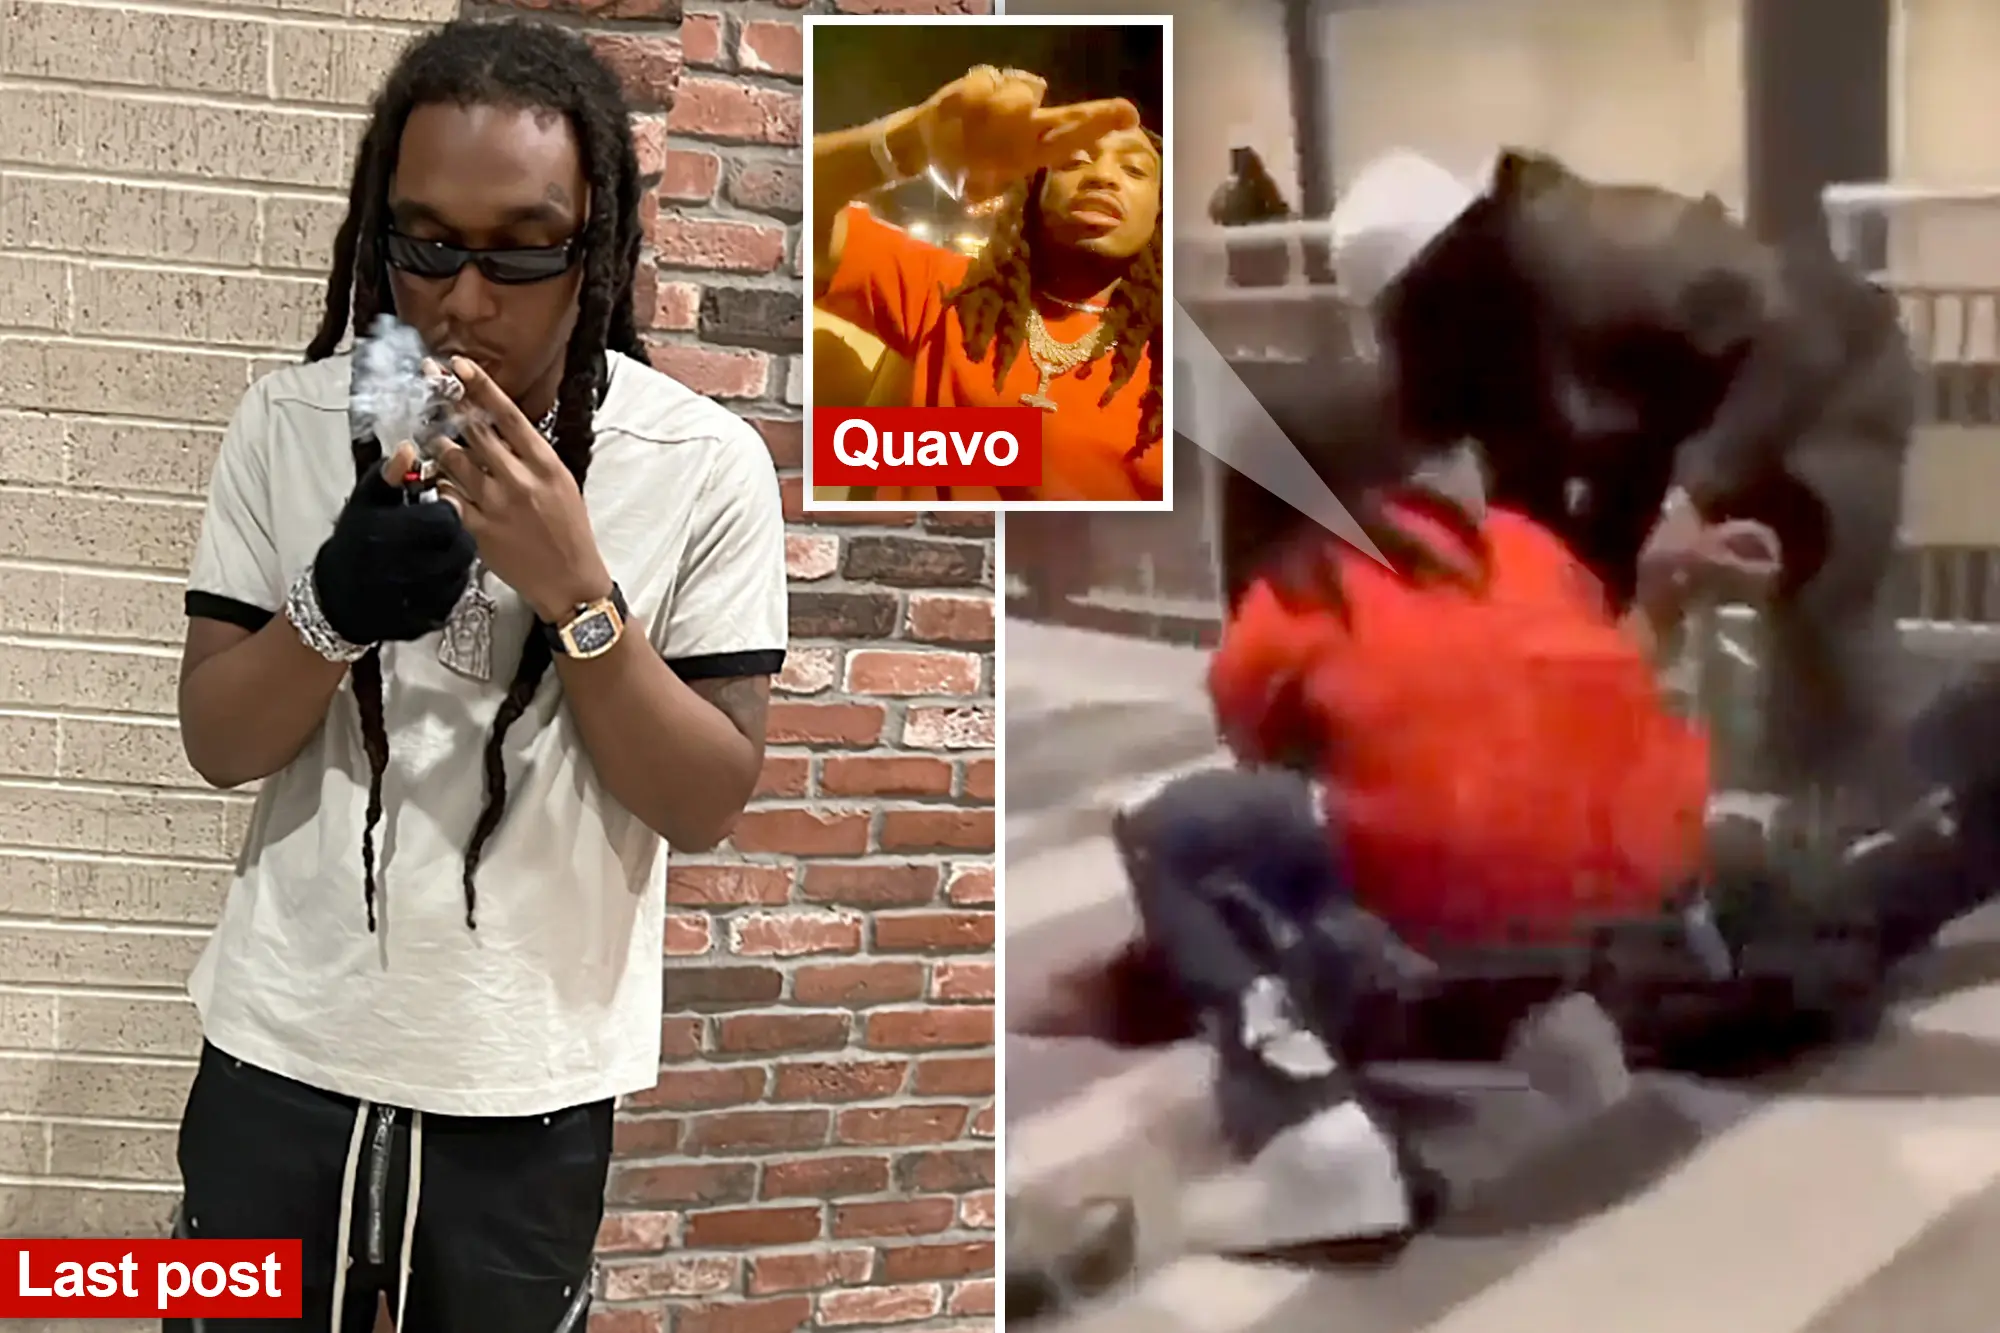 Leaked Link Video Original Footage Migos Rapper “TakeOff” was shot dead During dice game in Houston Twitter Viral